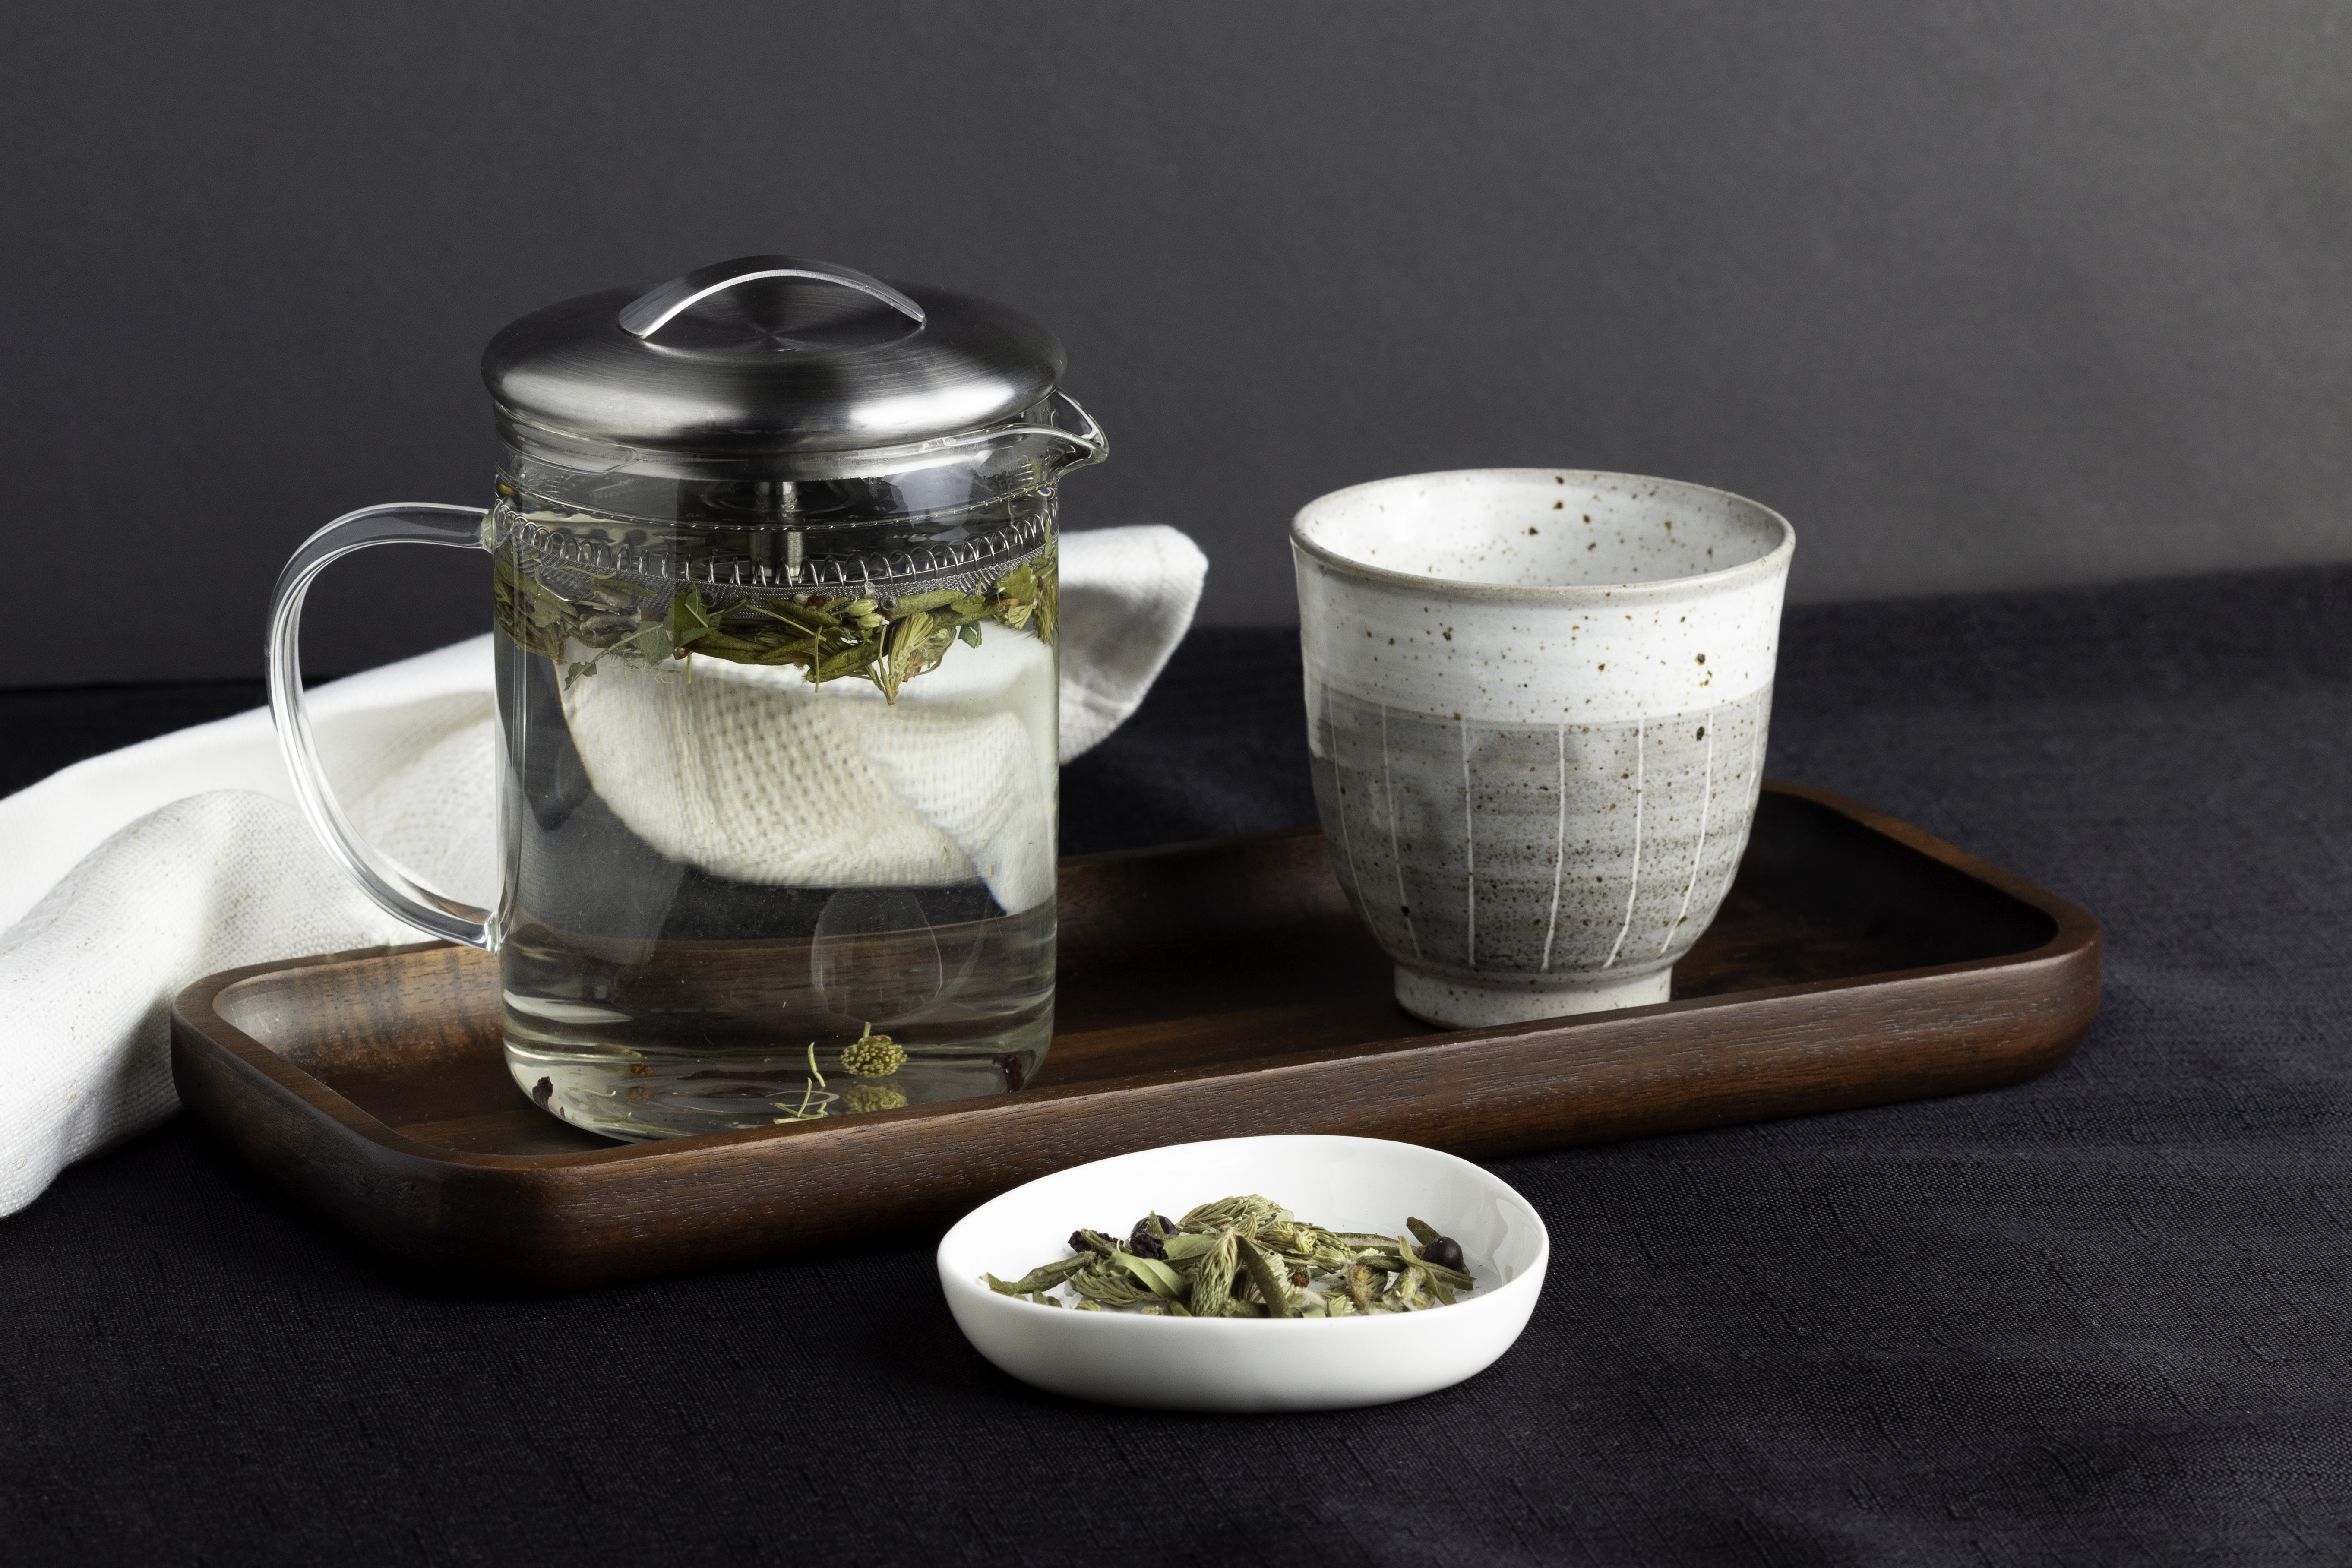 A glass tea carafe and a teacup sitting on a wooden tray on a dark background.